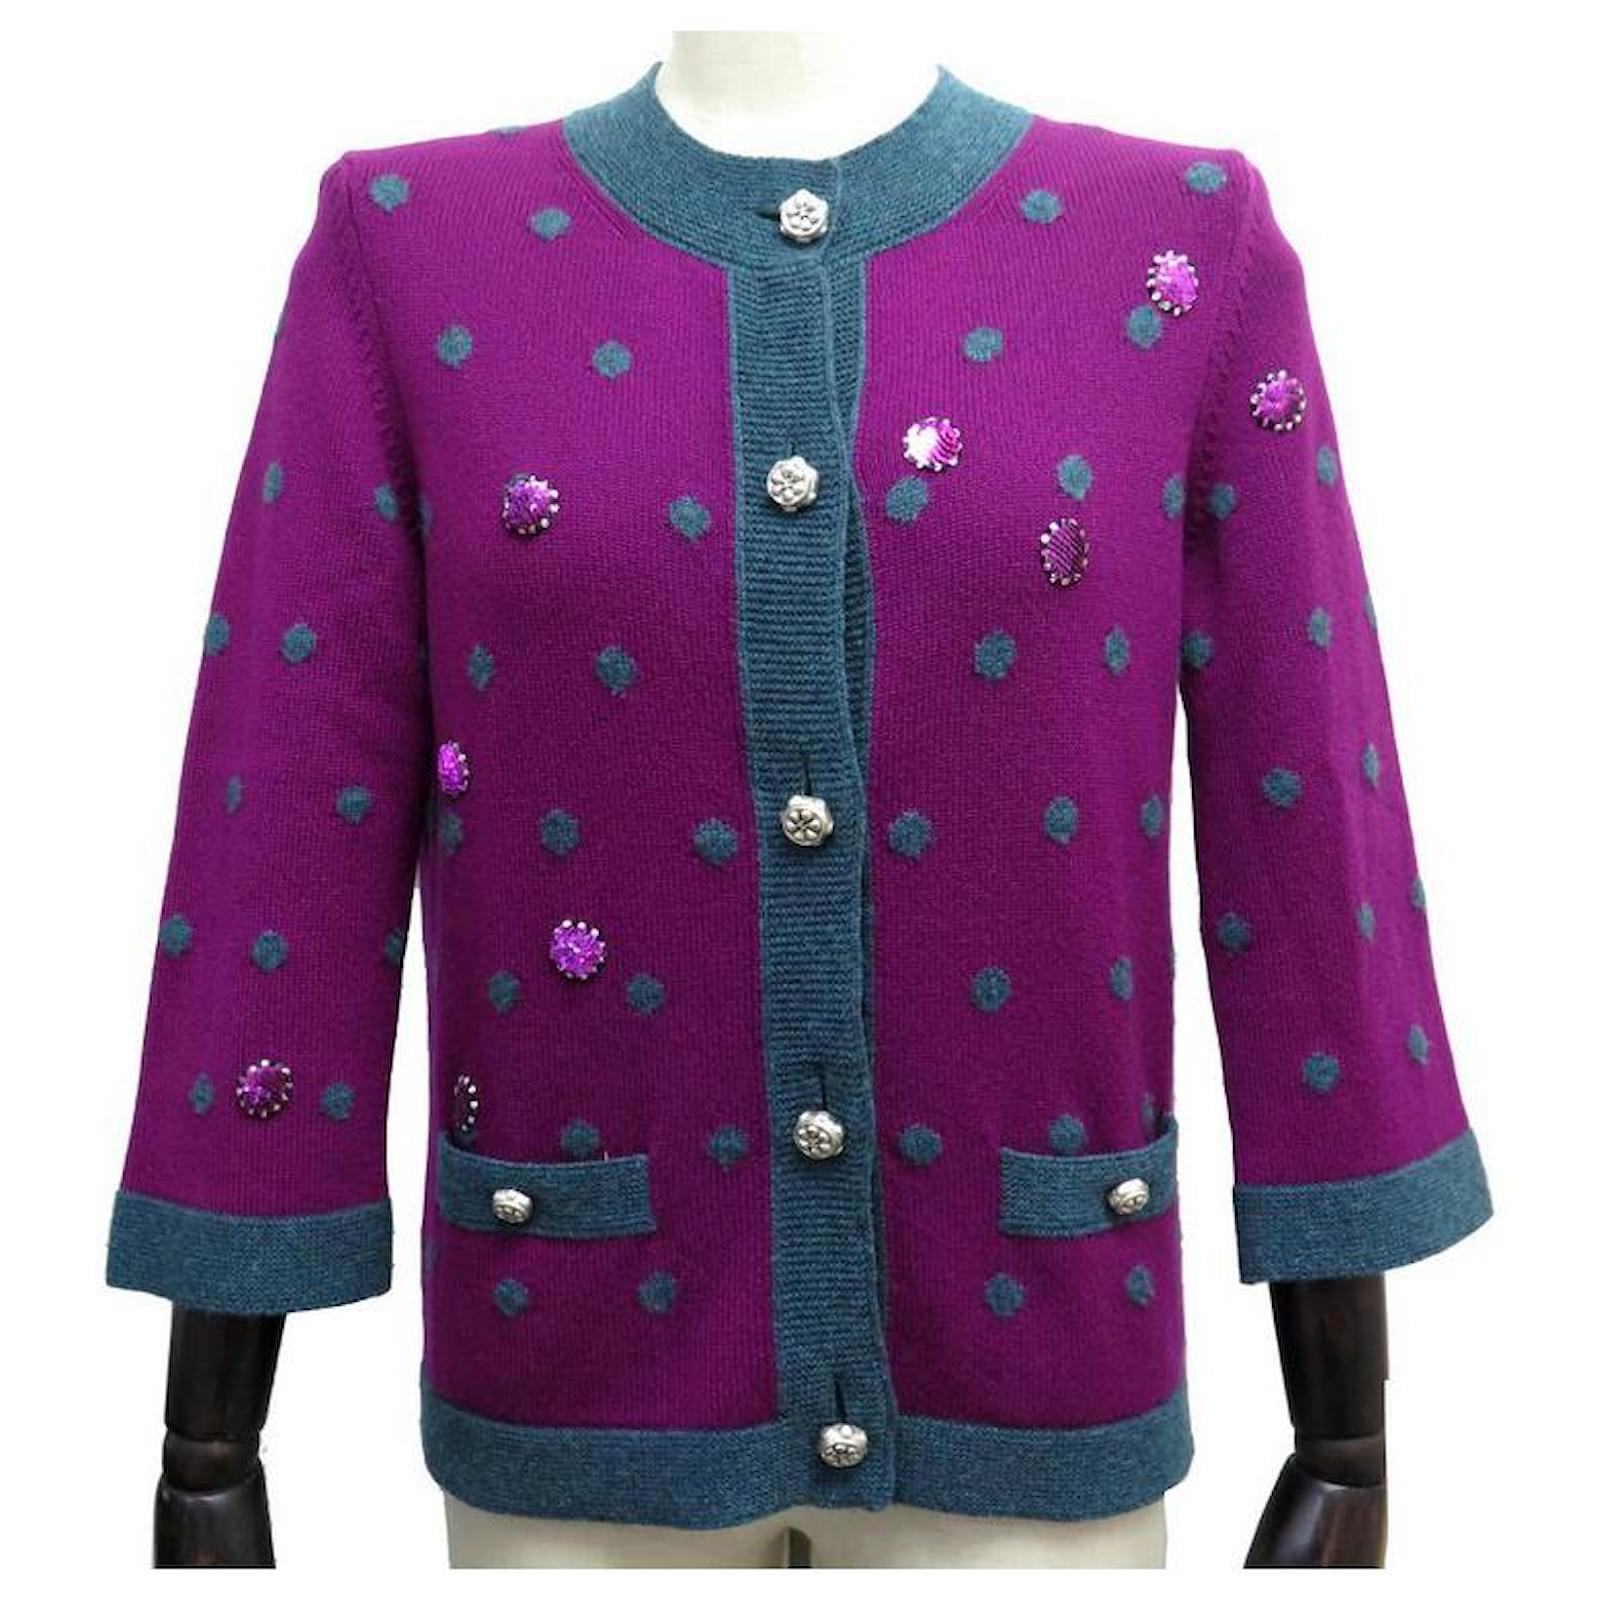 NEW CHANEL SWEATER VEST CARDIGAN WITH POLKA DOT M 38 PURPLE